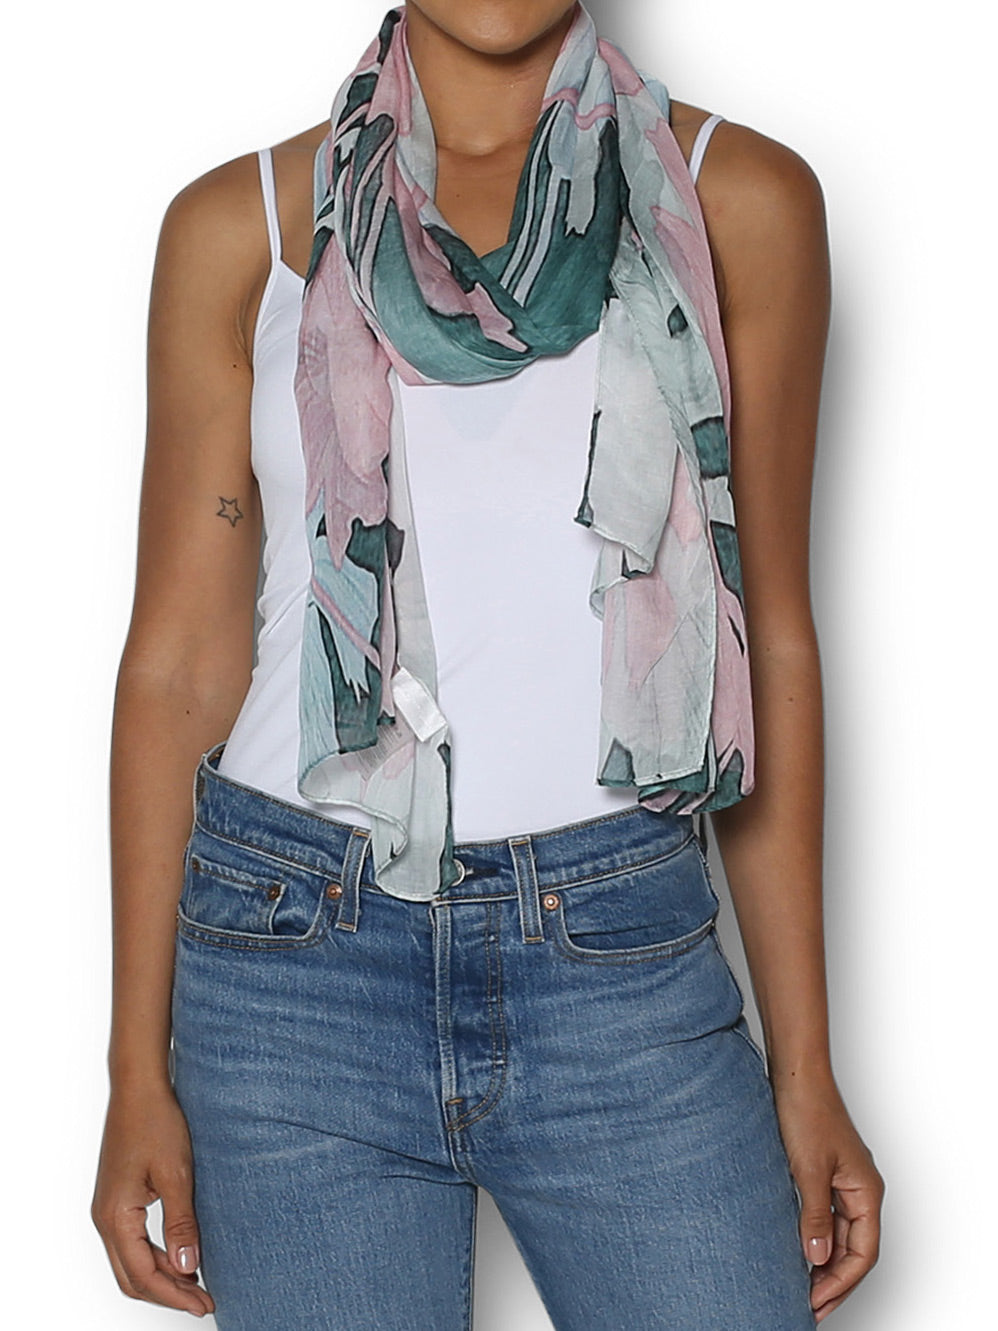 THE ARTISTS LABEL BLOOMS SCARF